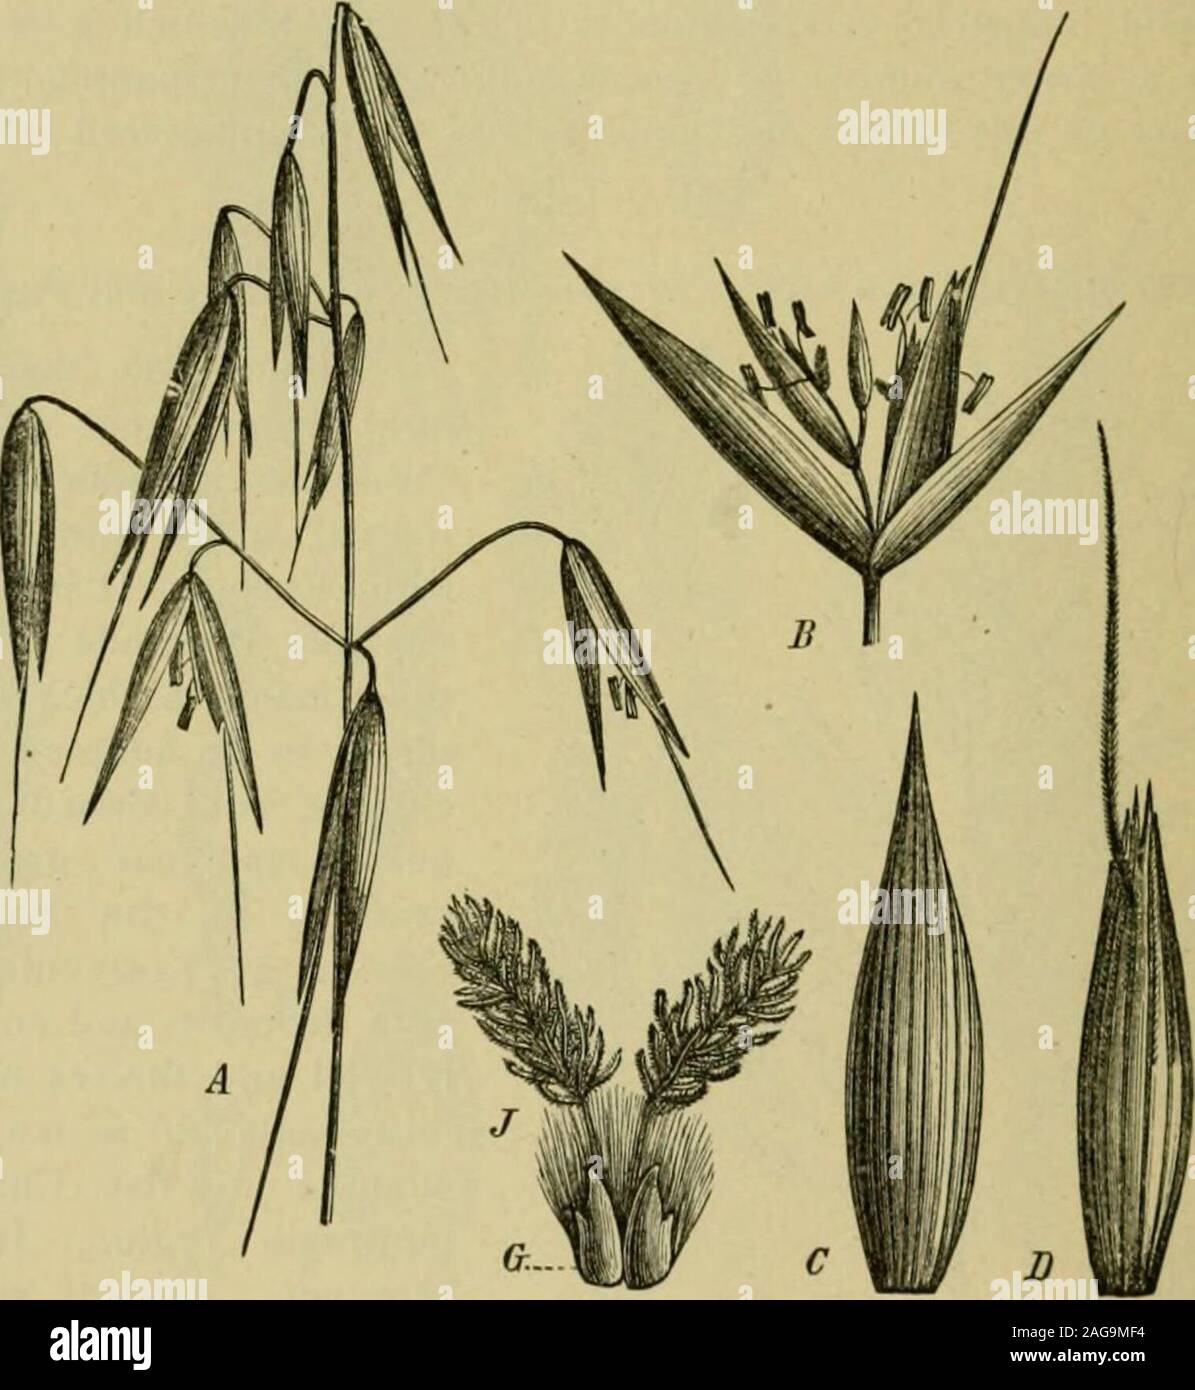 . Grasses and forage plants, by J.B. Killebrew. Smooth Btome Grass—Bromus inermis.Panicle. .J. Upper leaf. 1. Spikelet. 5, Uinptyglumes, (i, 7. Floral glume.. Botanical De r,pt, of Oats—Arena saliva. A, a portion of the inflorescence which is a simple, open panicle. B, a spikelet,two-flowered, with a sterile rudiment terminating the rachilla. C, one of the broad,lanceolate empty glumes. /), a flowering glume; this hears an awn on the back justbelow the two-toothed apex. /, pistil; the ovarv of which is very hairy. G, lodicules.i  The oat i.s a most useful forage i)lant; but fts culture and use Stock Photo